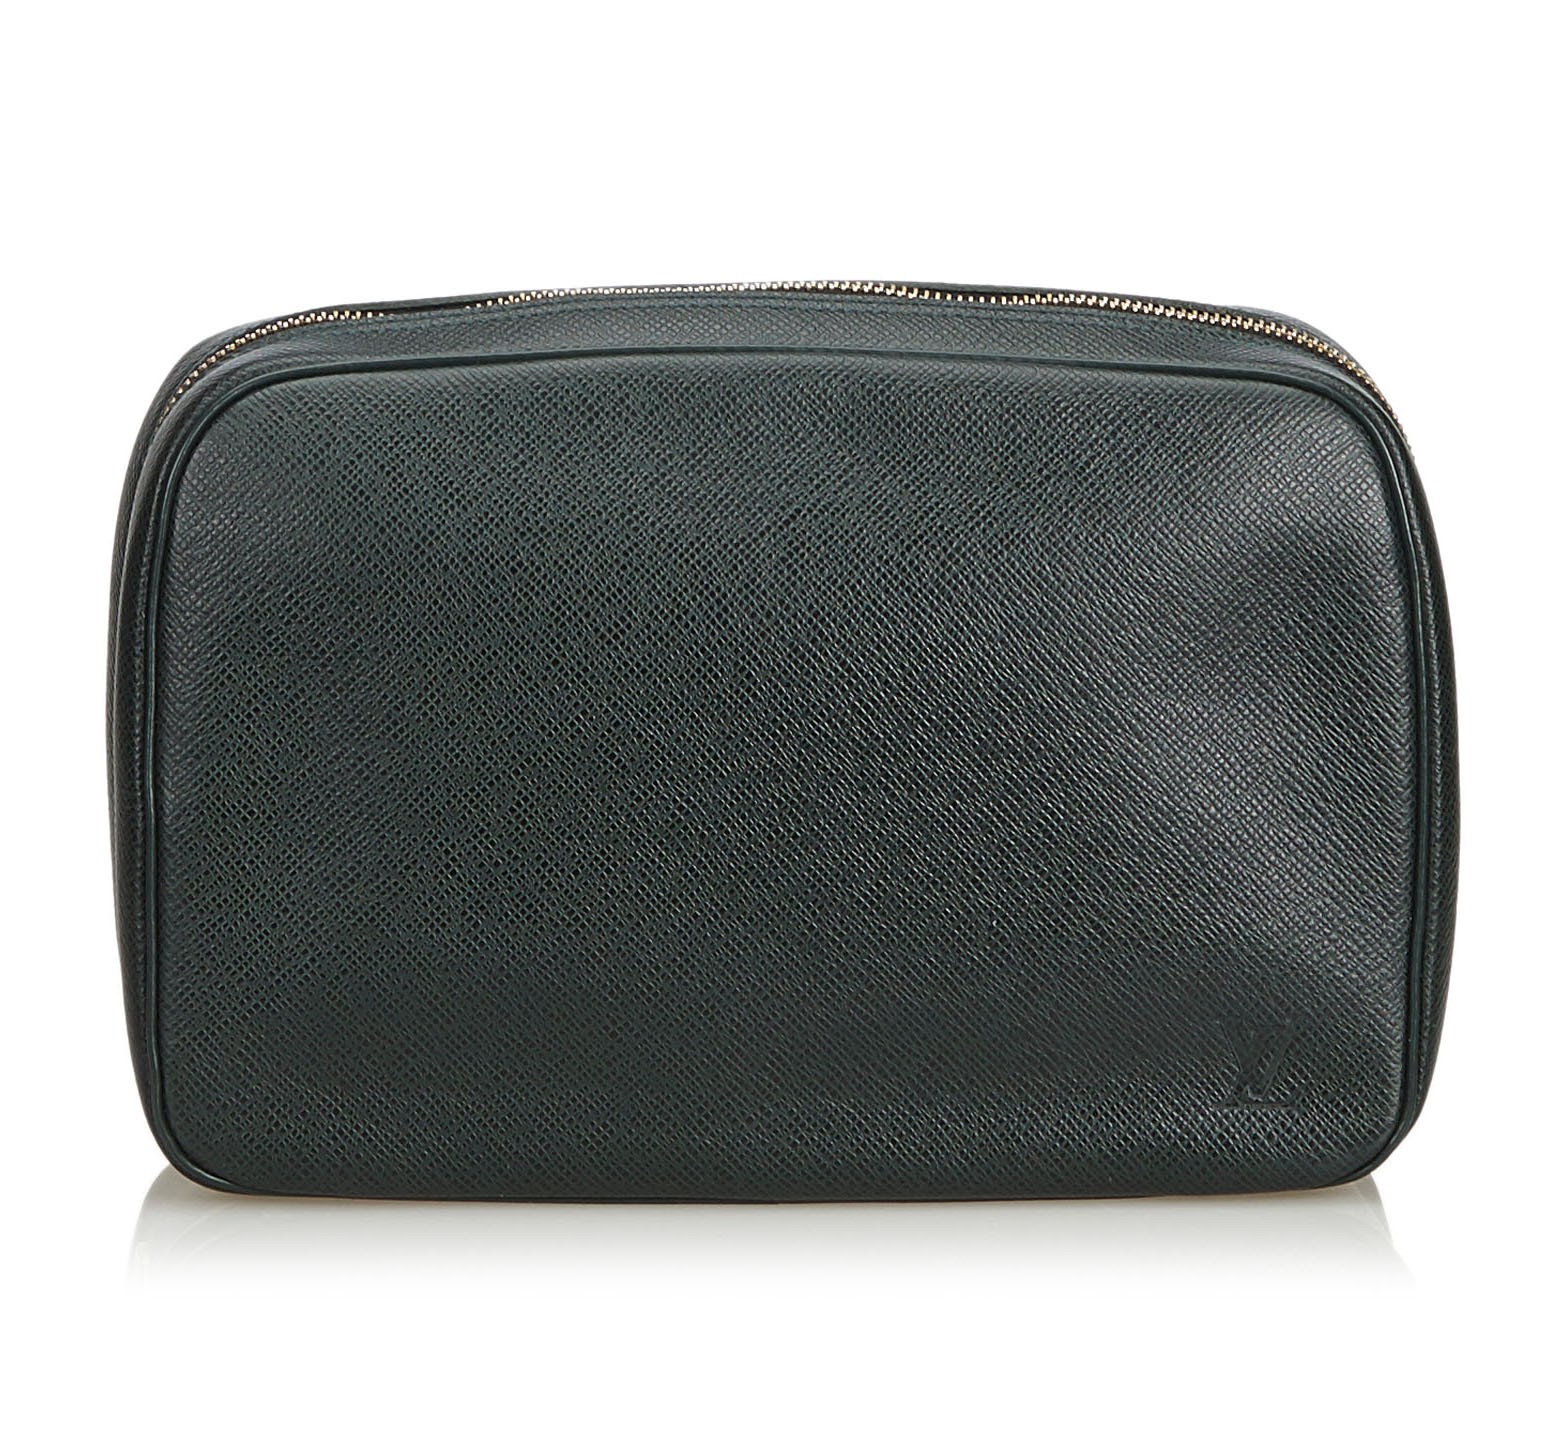 vuitton toiletry pouch louis vuitton daily pouch outfit